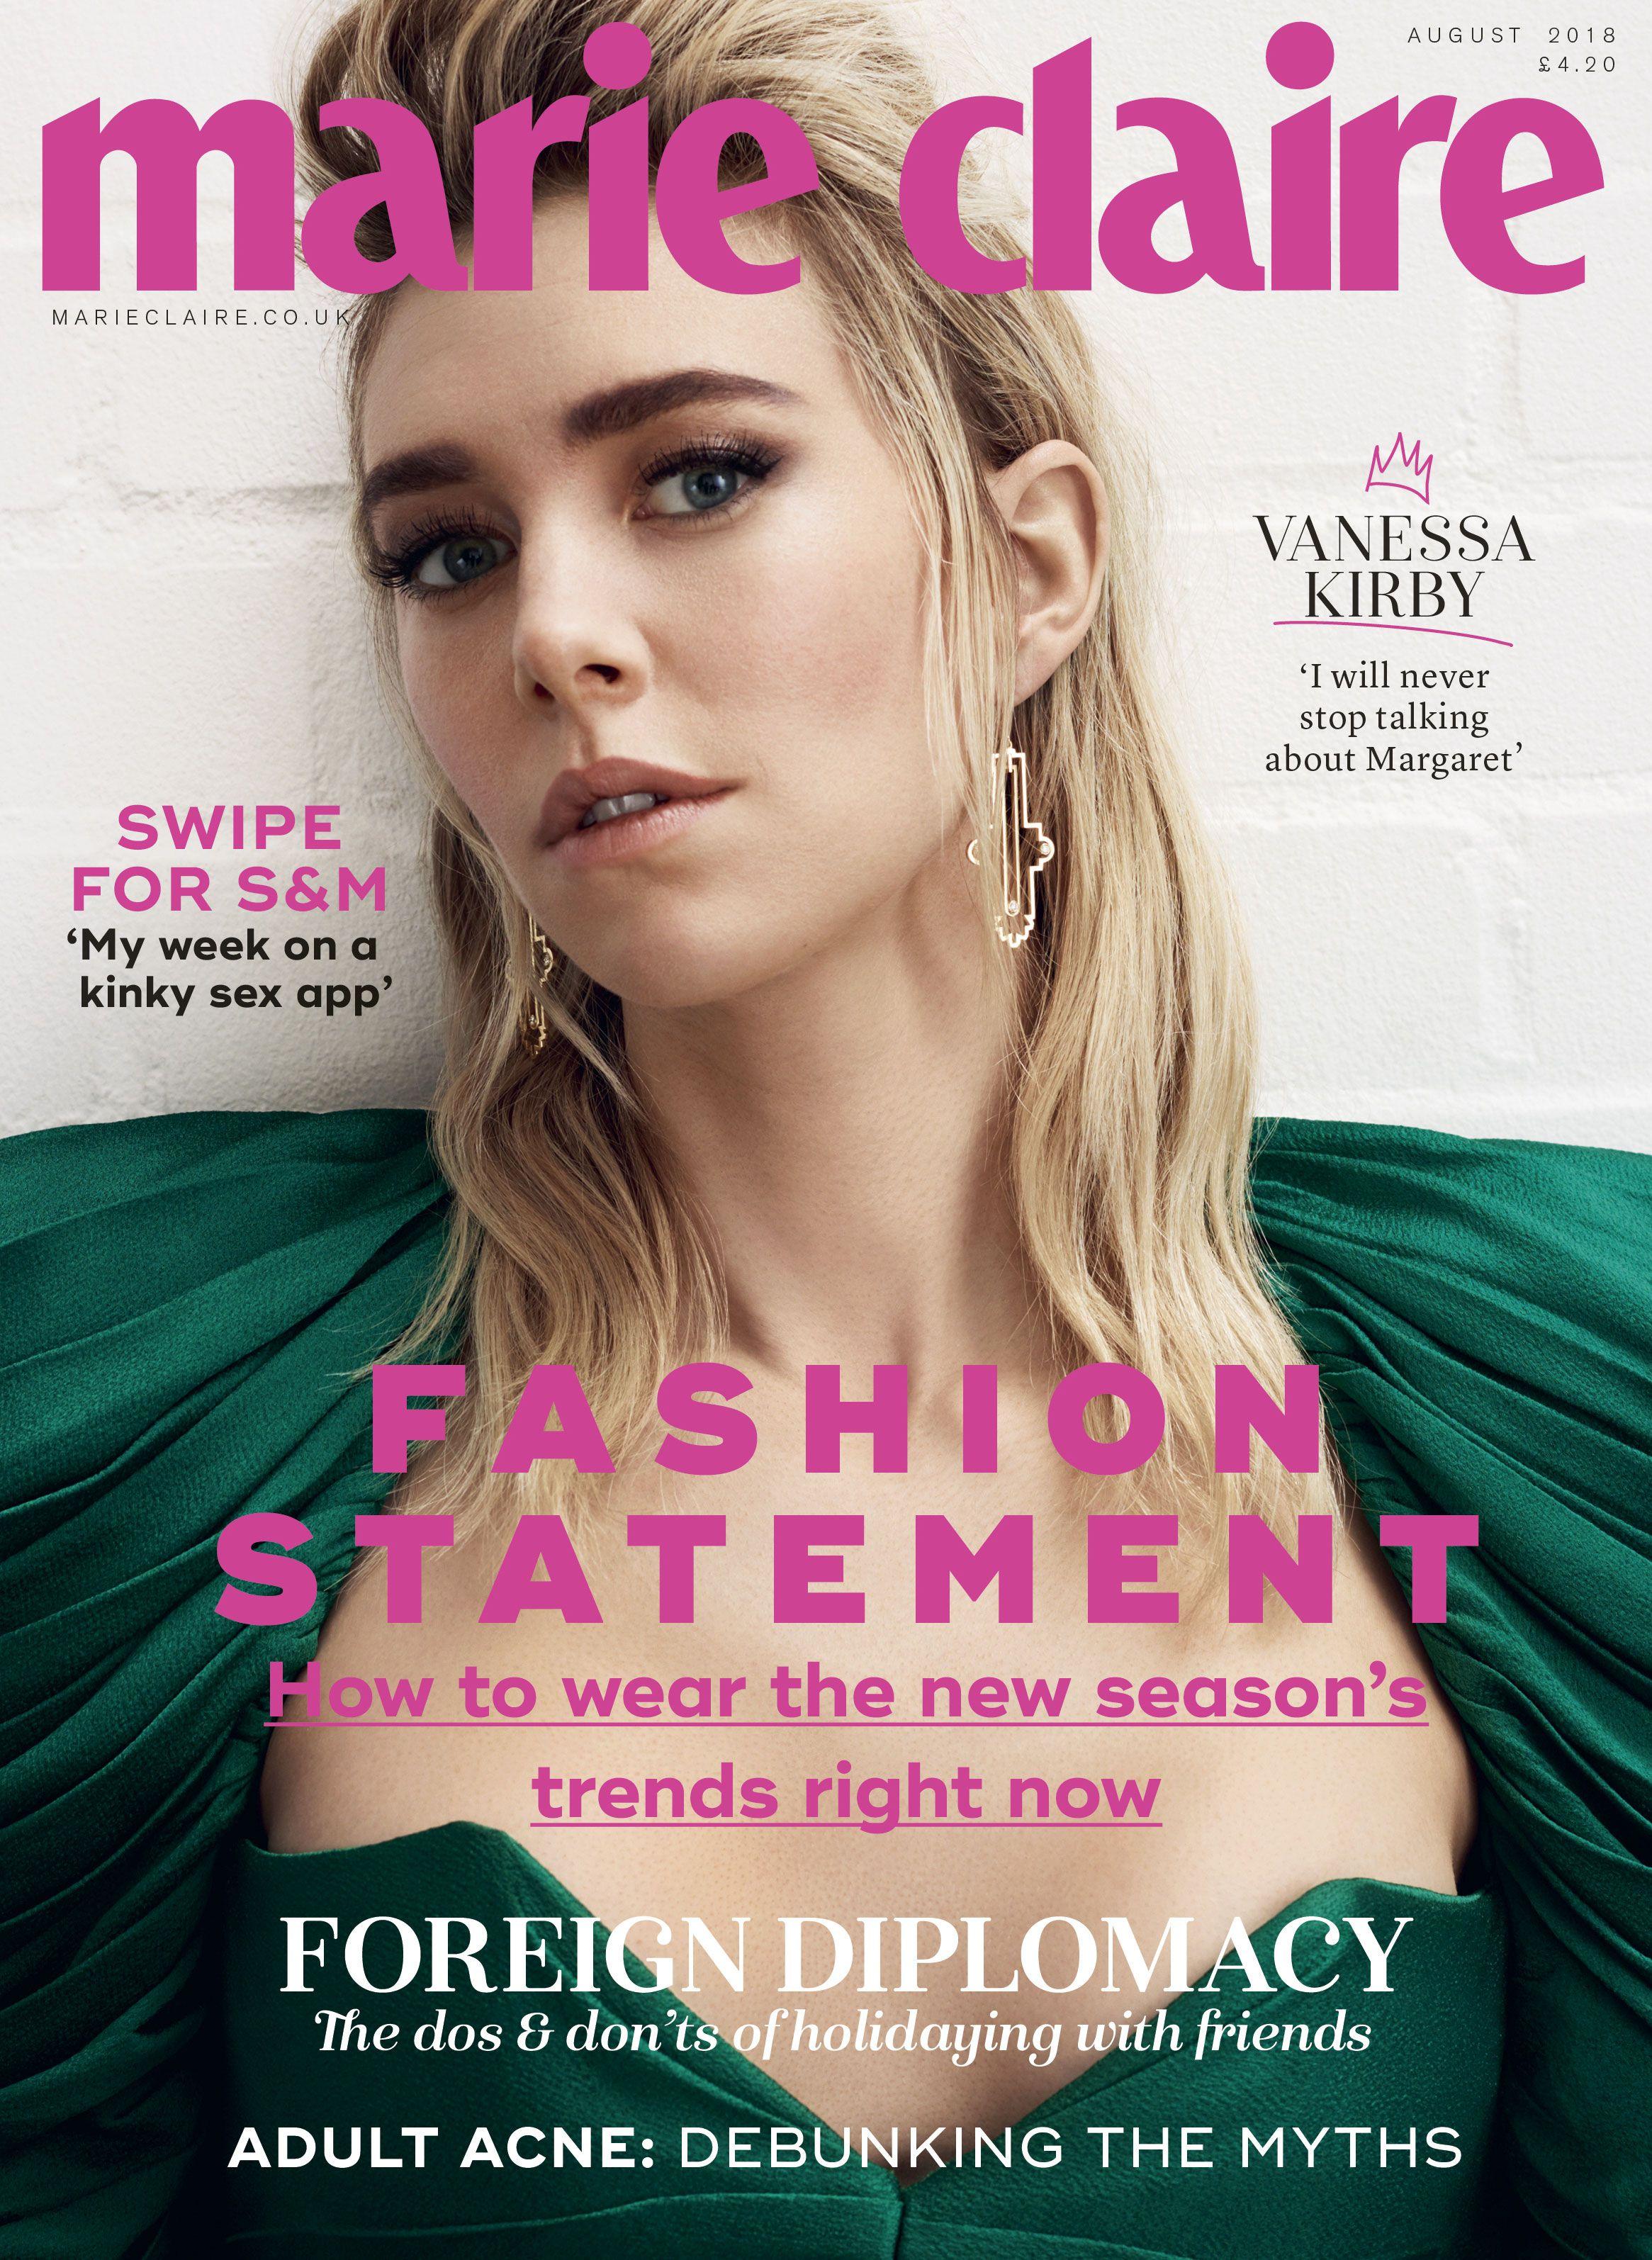 Marie Claire Company Logo - Vanessa Kirby On The Crown Text She Got From Helena Bonham-Carter